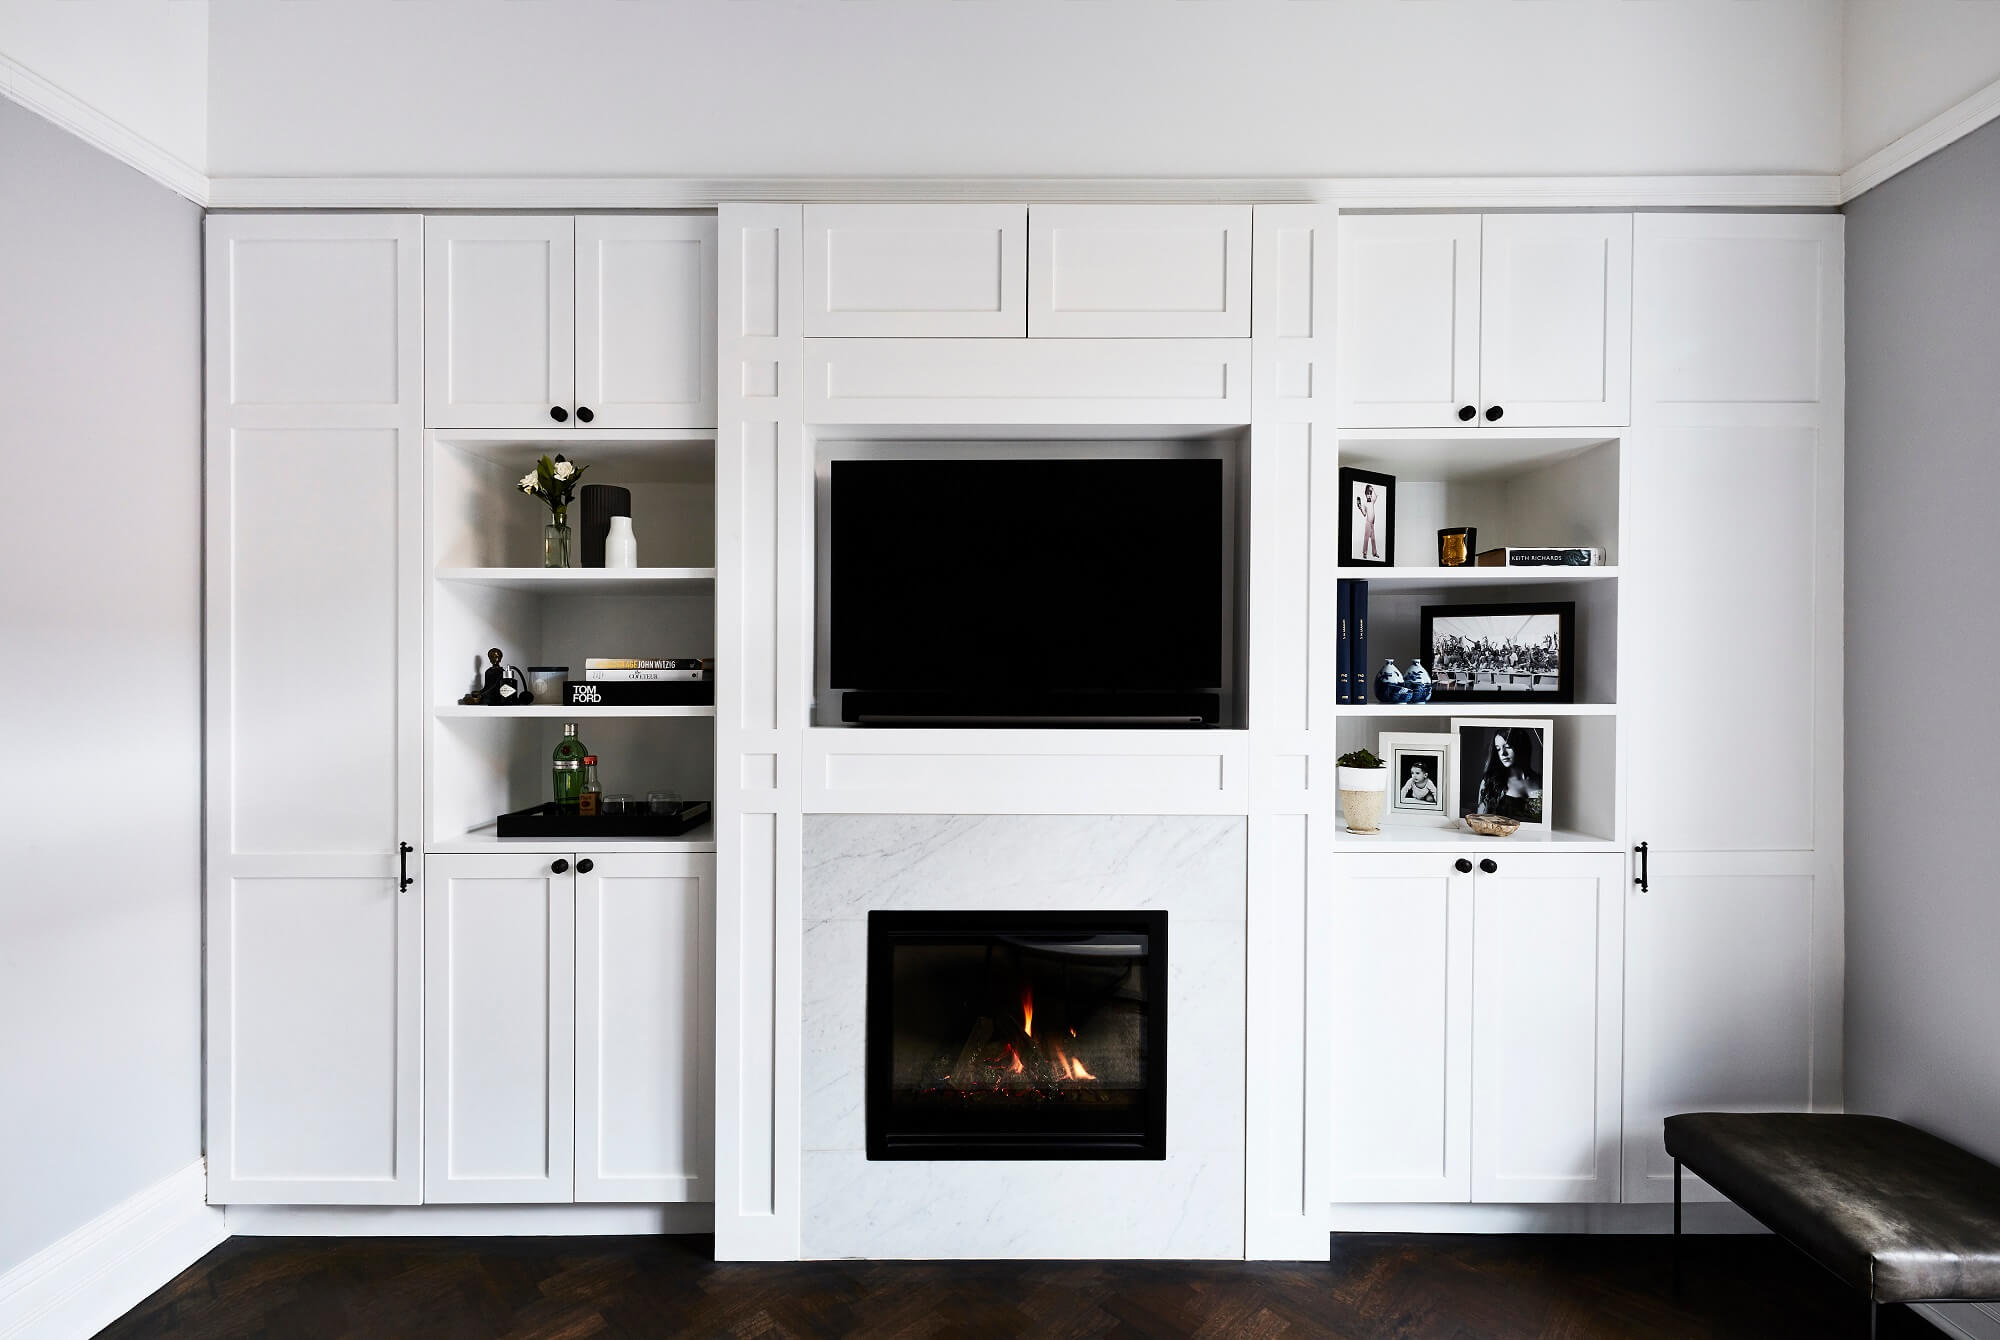 12 Gorgeous Ideas For Built-Ins Around a Fireplace - Brick-Anew